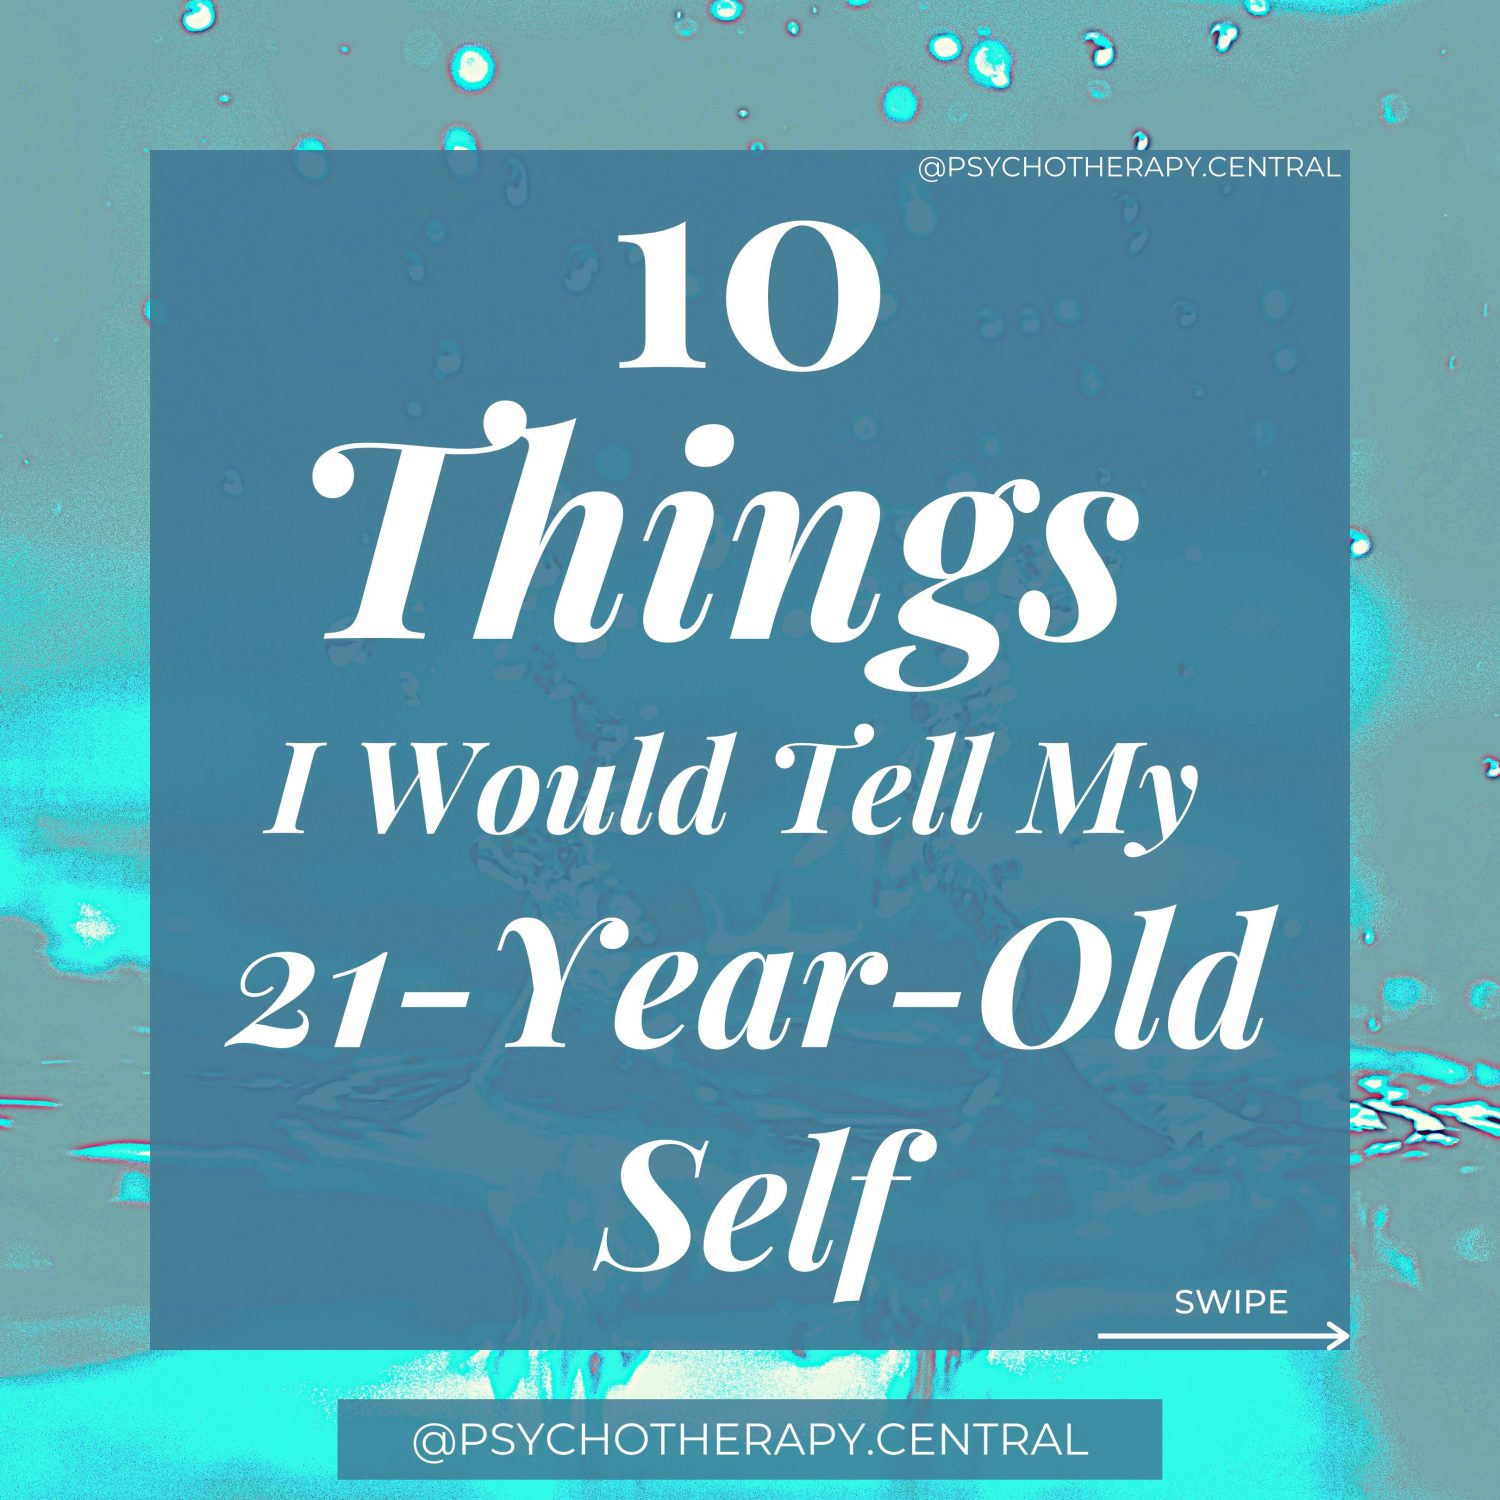 10 Things I Would Tell My 21-Year-Old Self